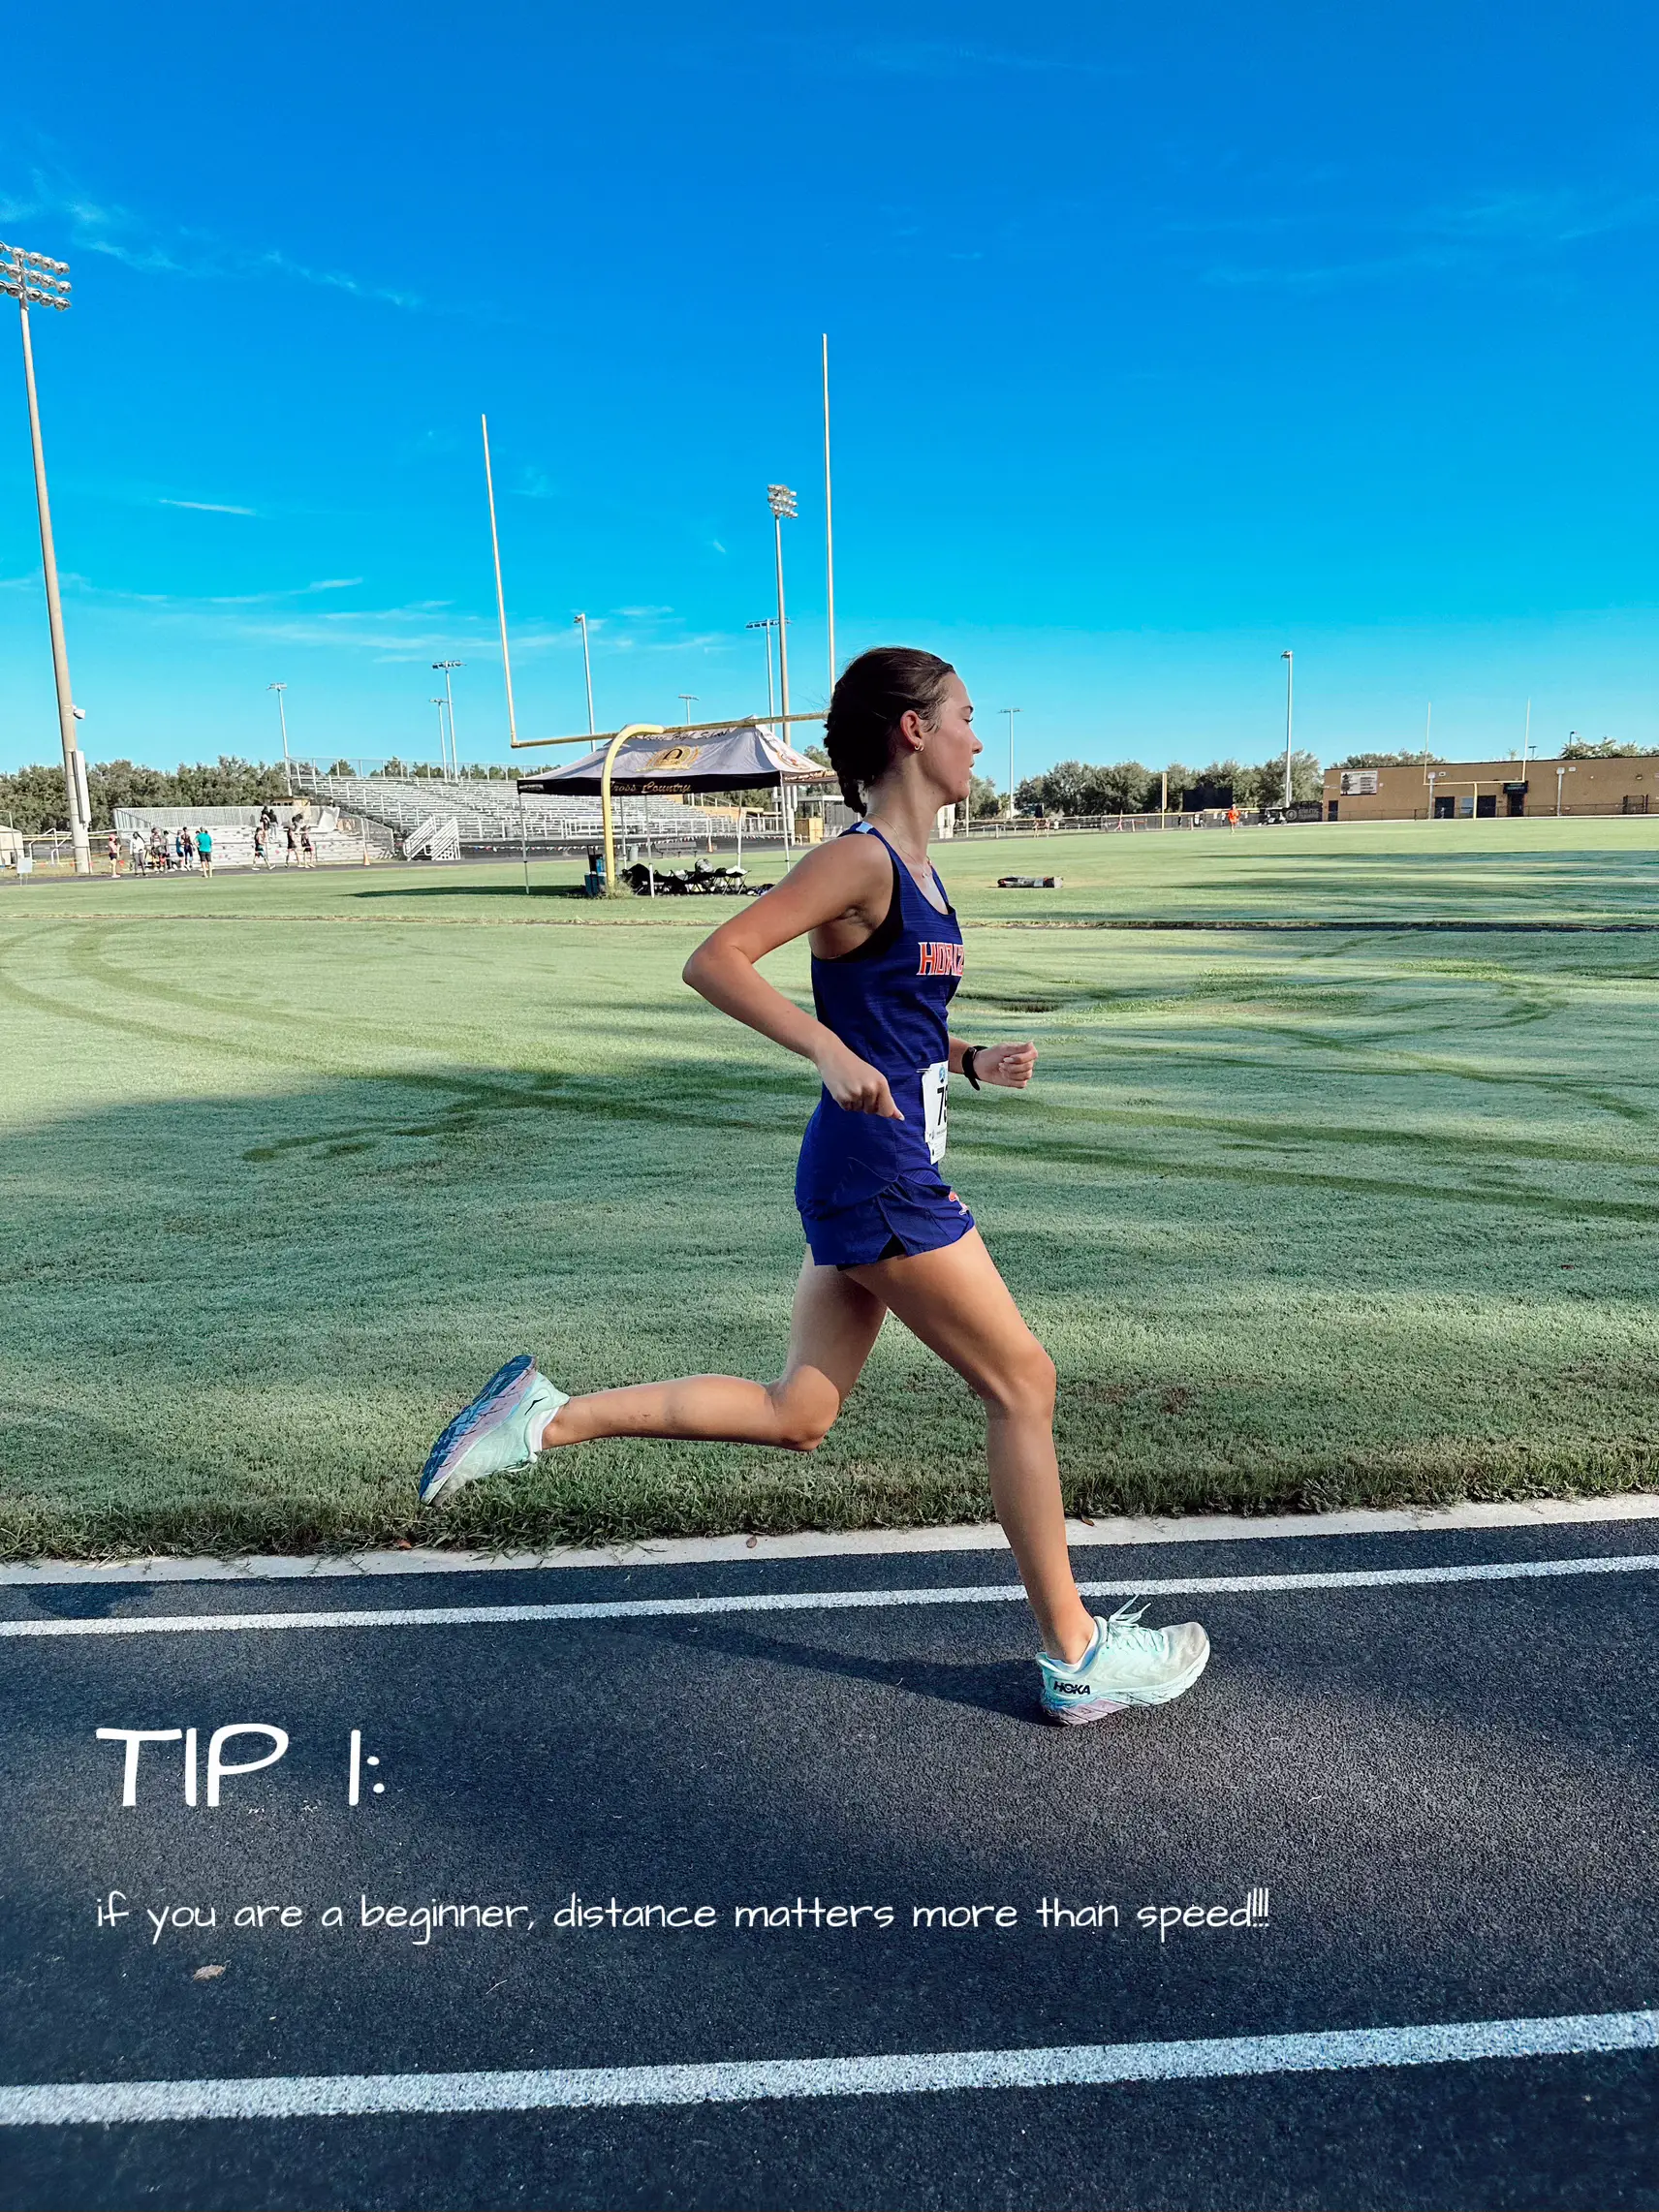 My running tips ; how I went from 1 to 13 miles